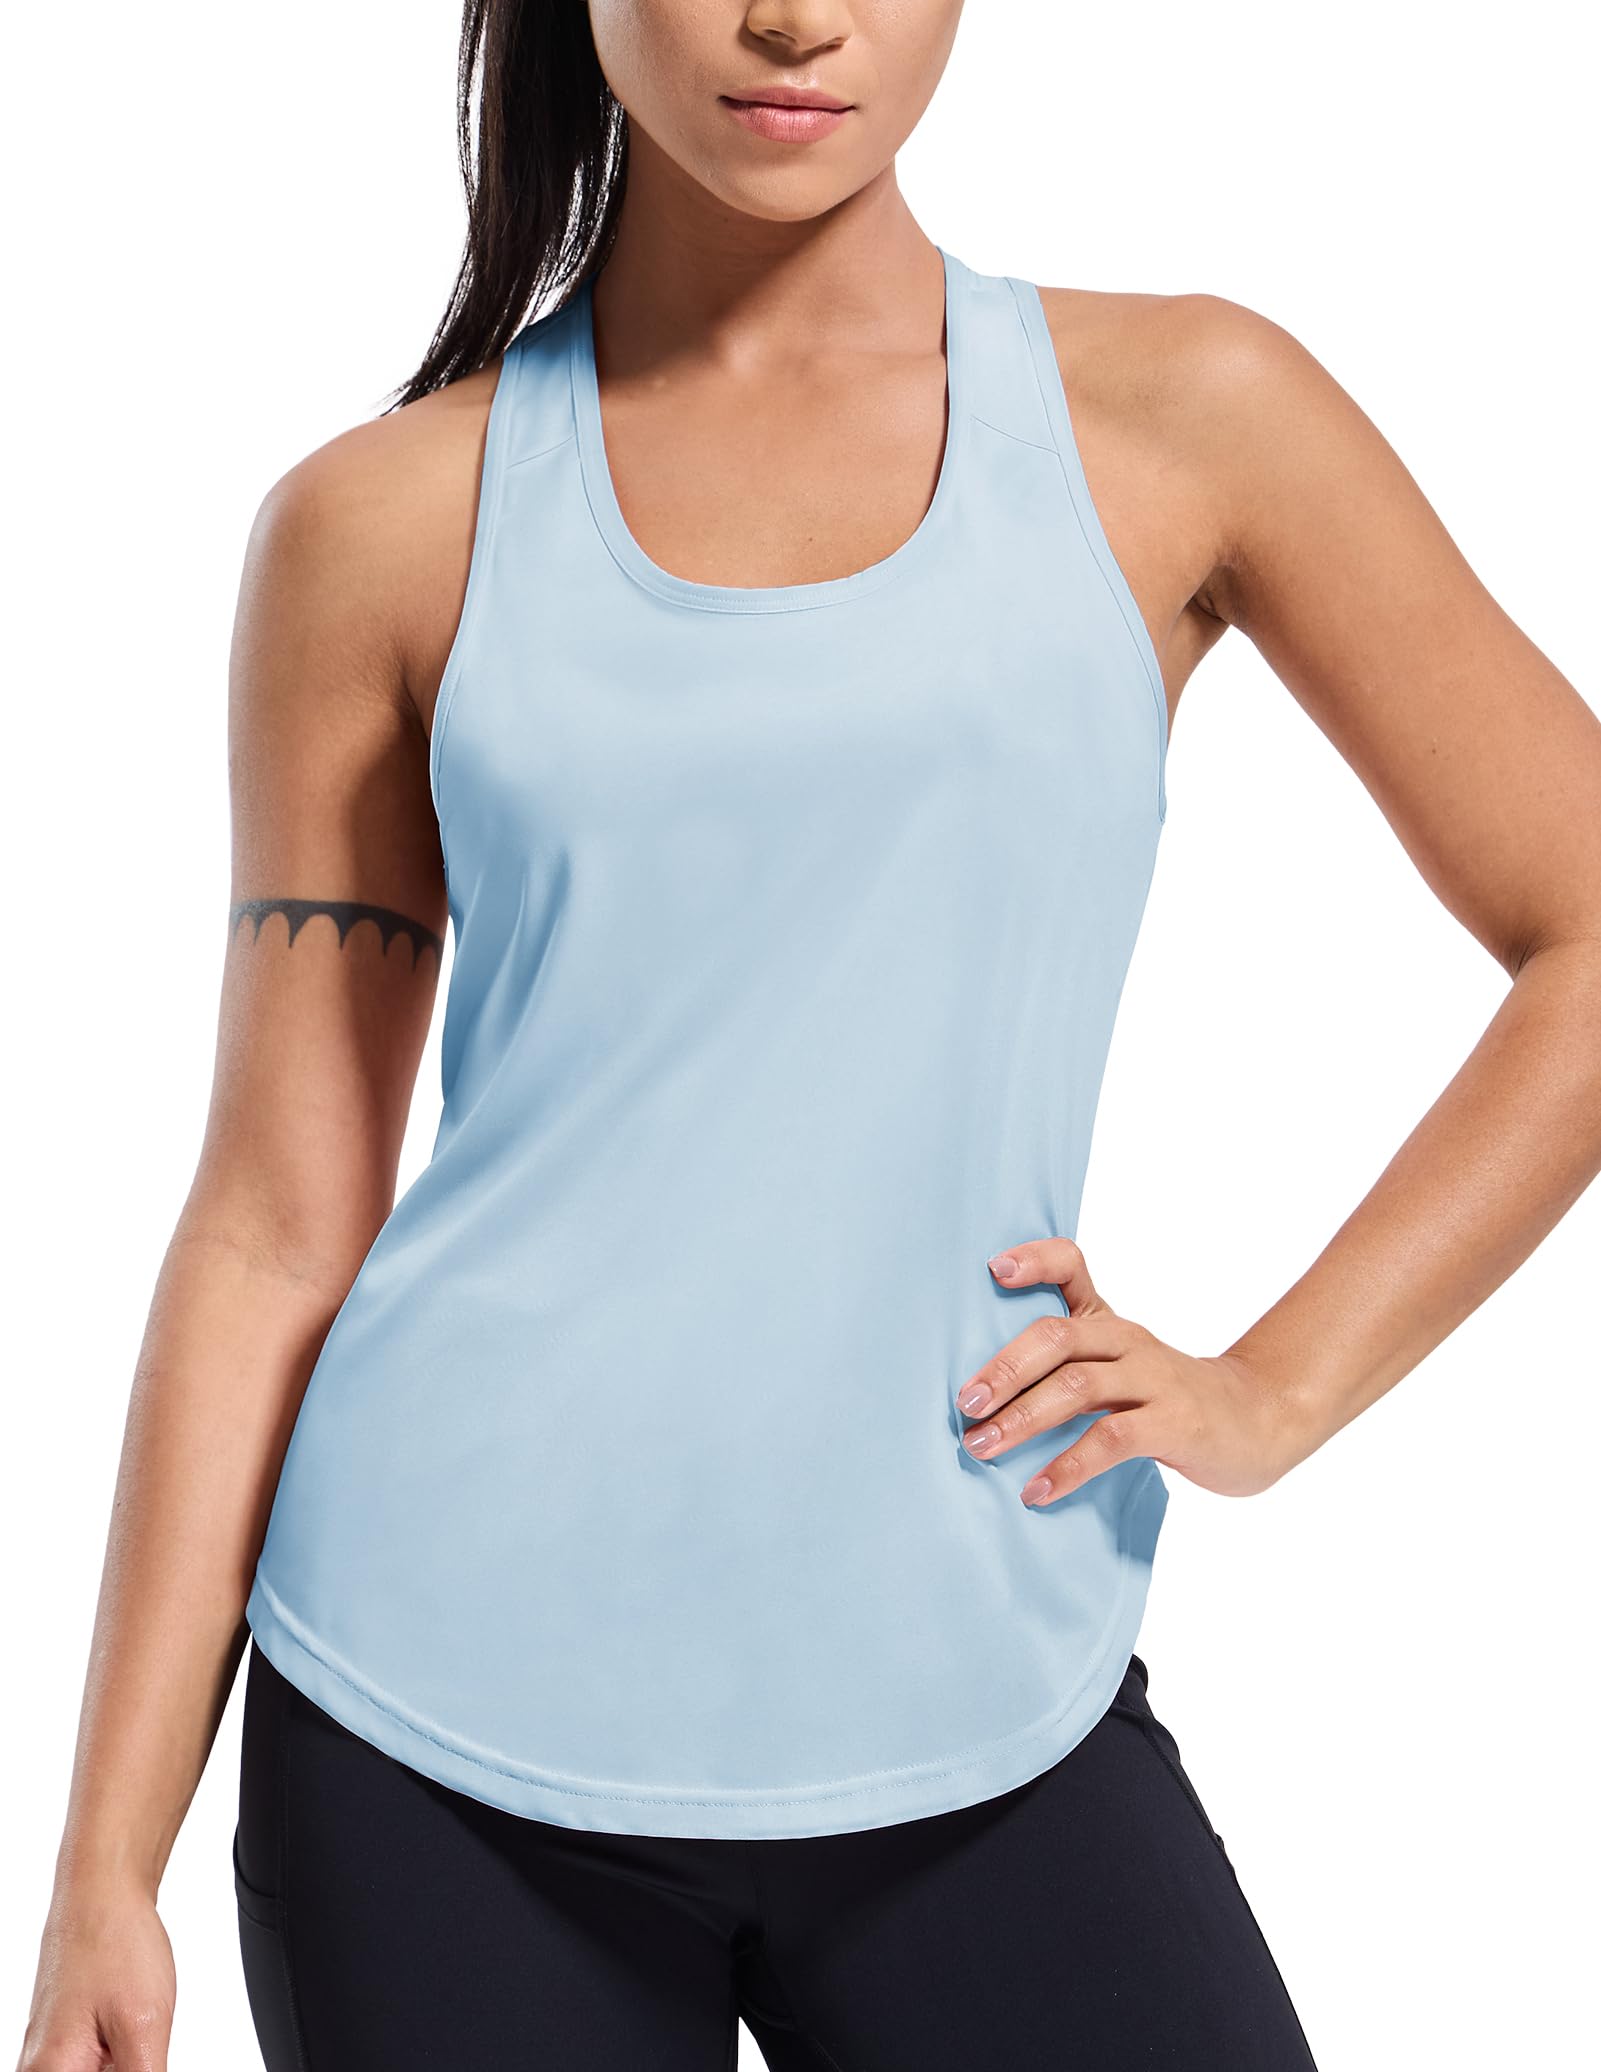 Women's Racerback Tank Tops Dry Fit Workout Shirts